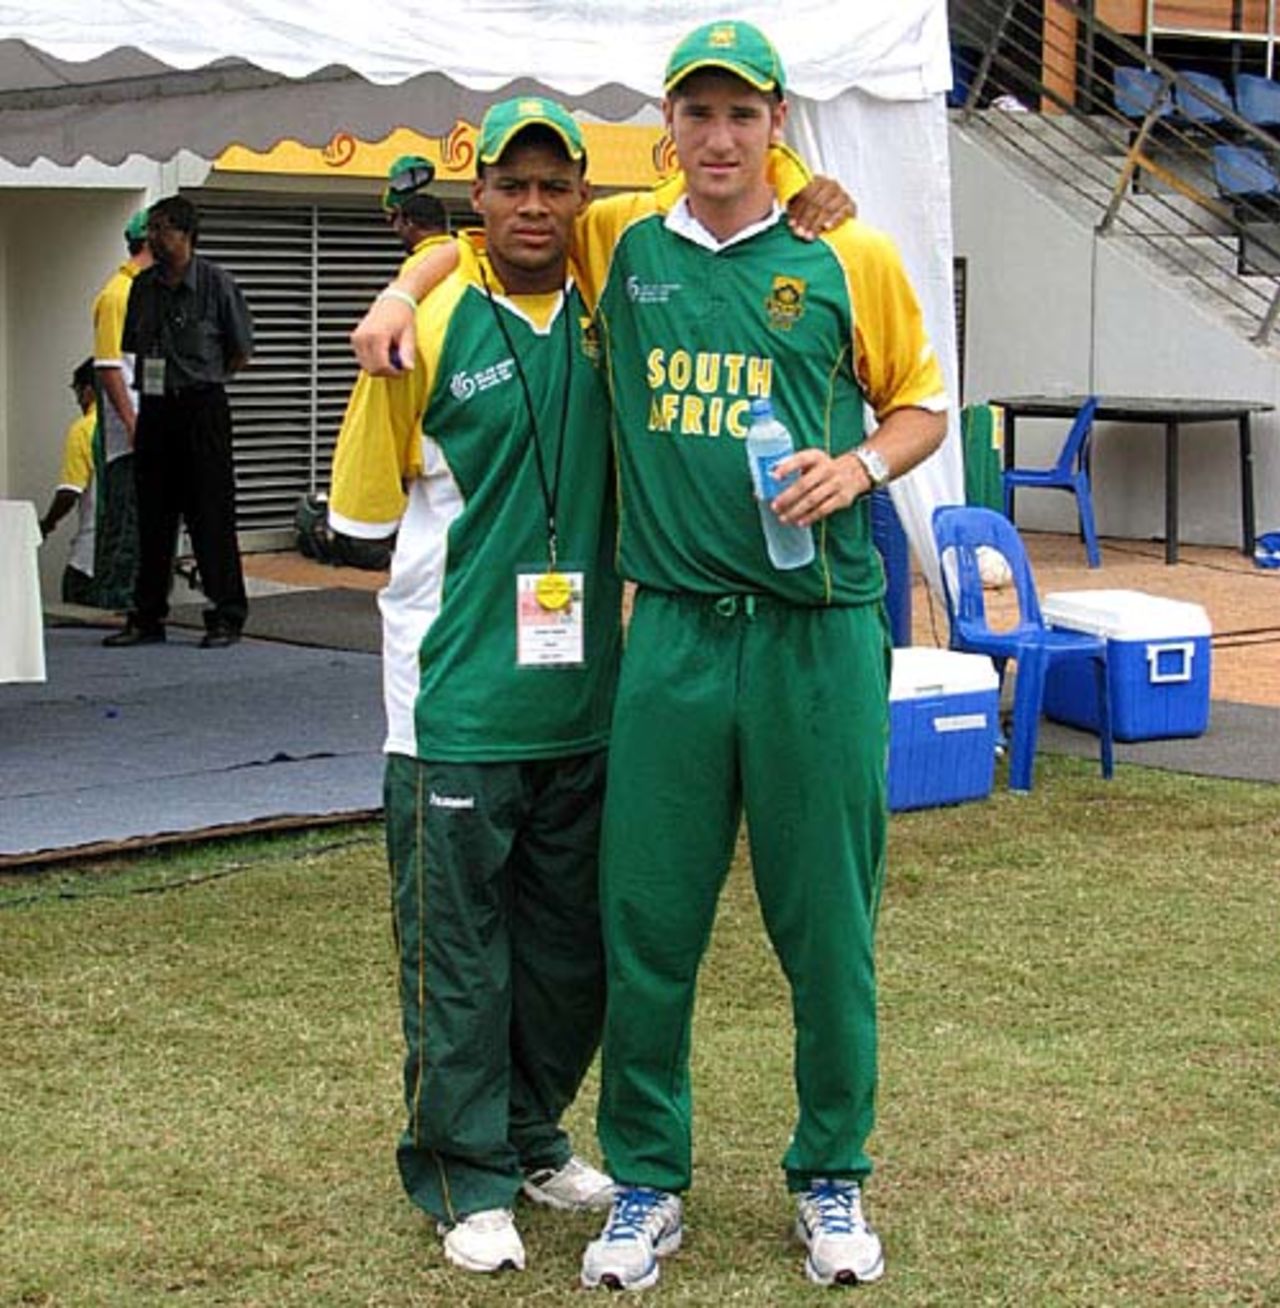 Clayton August and Wayne Parnell after South Africa's win, Pakistan v South Africa, 2nd semi-final, Under-19 World Cup, Kuala Lumpur, March 1, 2008 